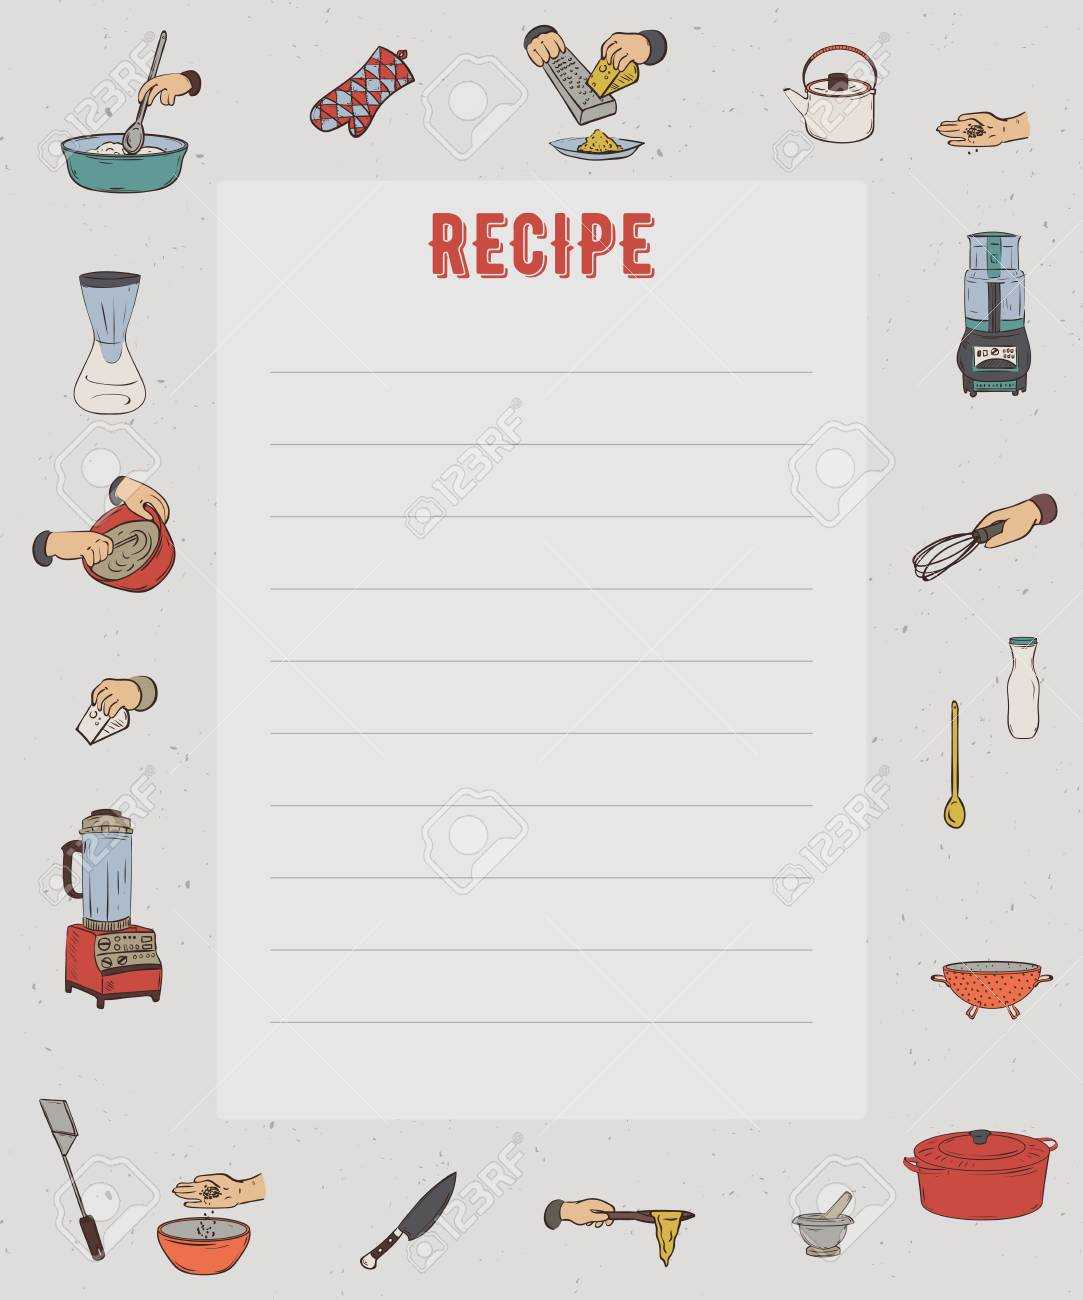 Recipe Card. Cookbook Page. Design Template With Kitchen Utensils.. Throughout Restaurant Recipe Card Template